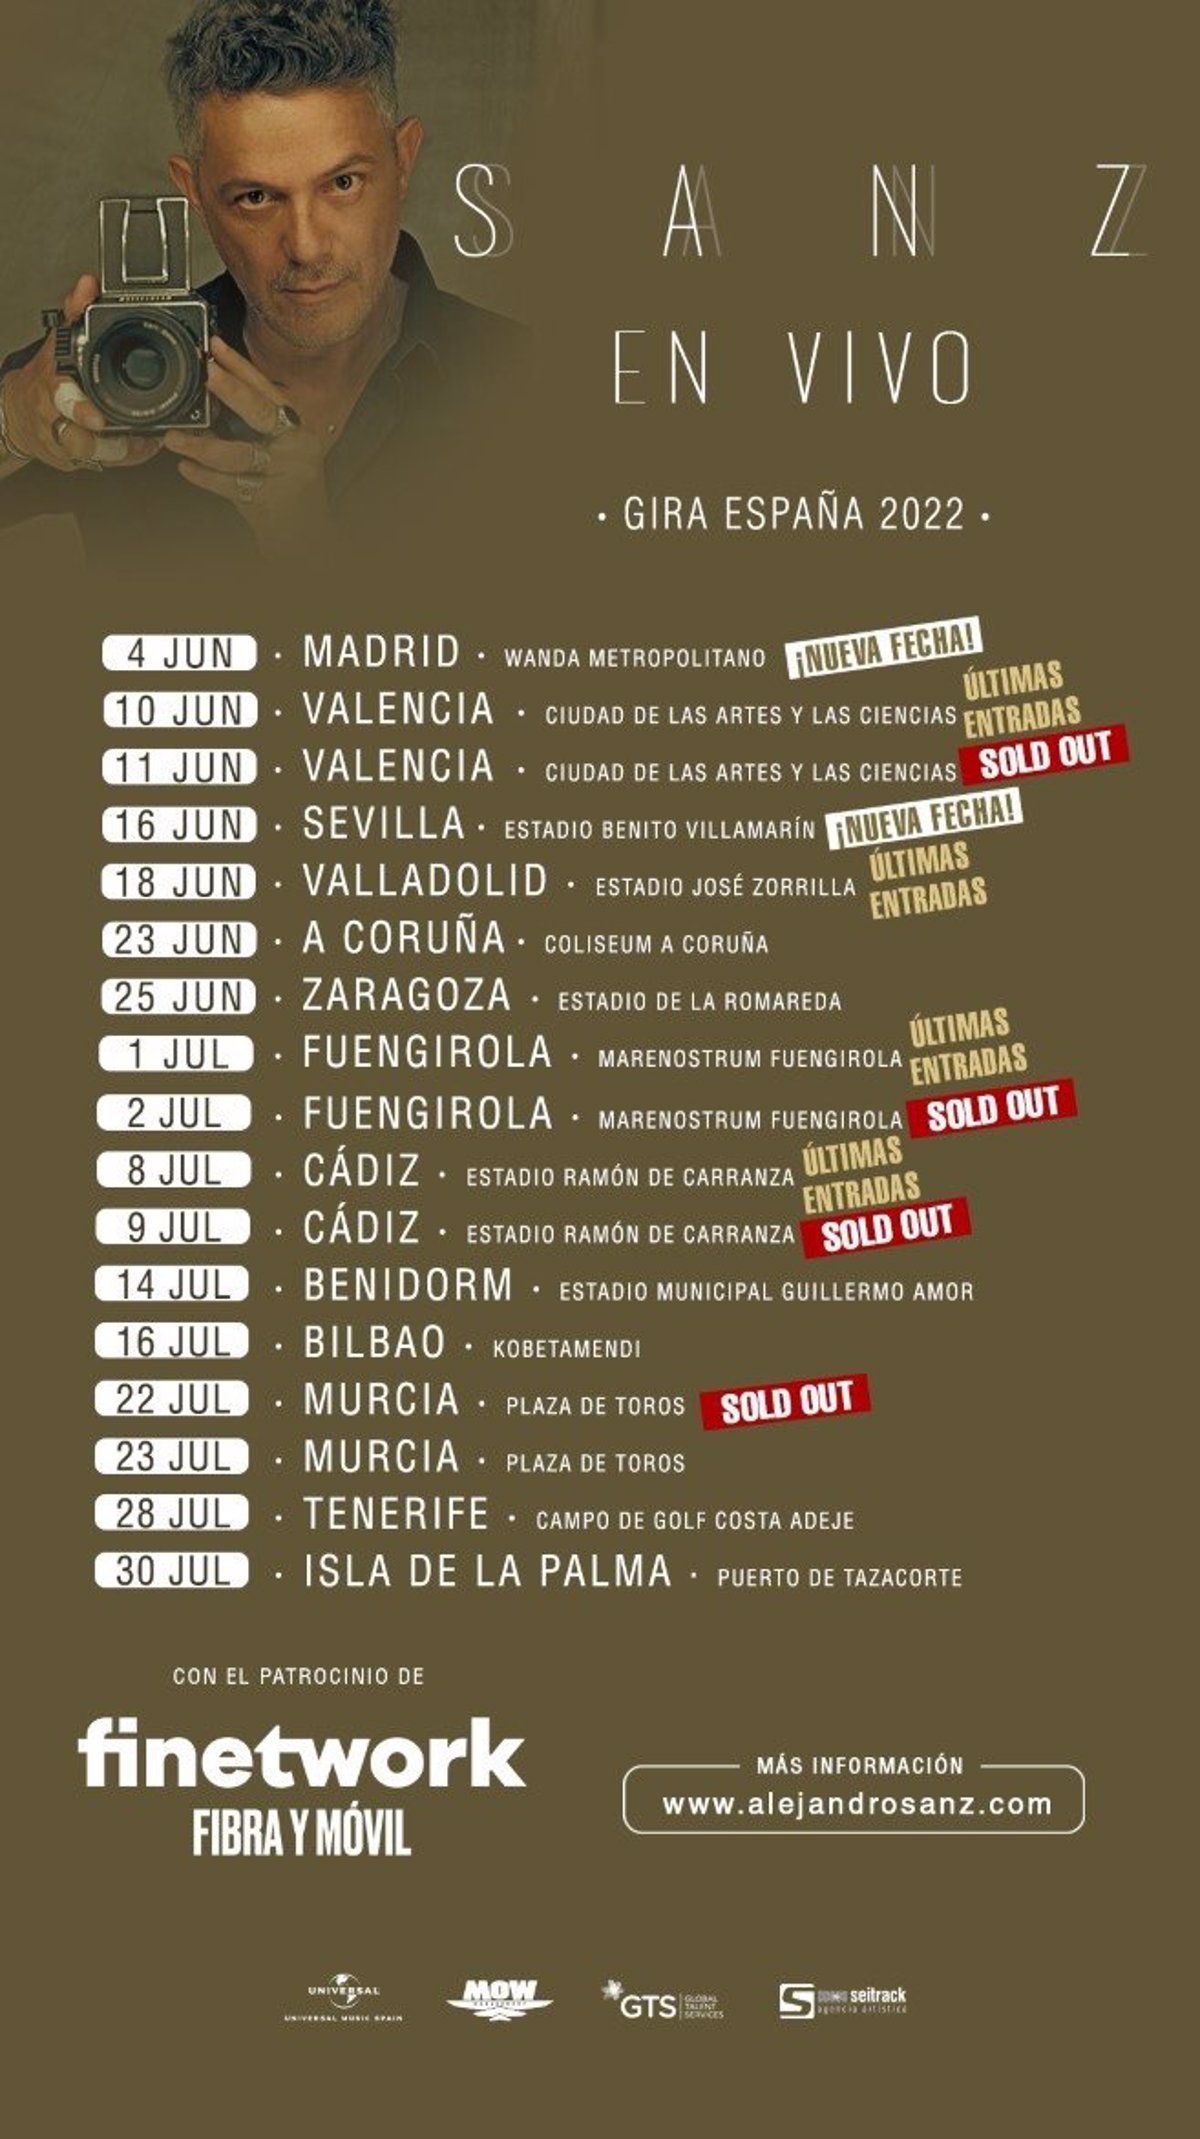 Alejandro Sanz presents a tour in Spain, with which he will tour 13 cities in June and July, including Madrid and Seville